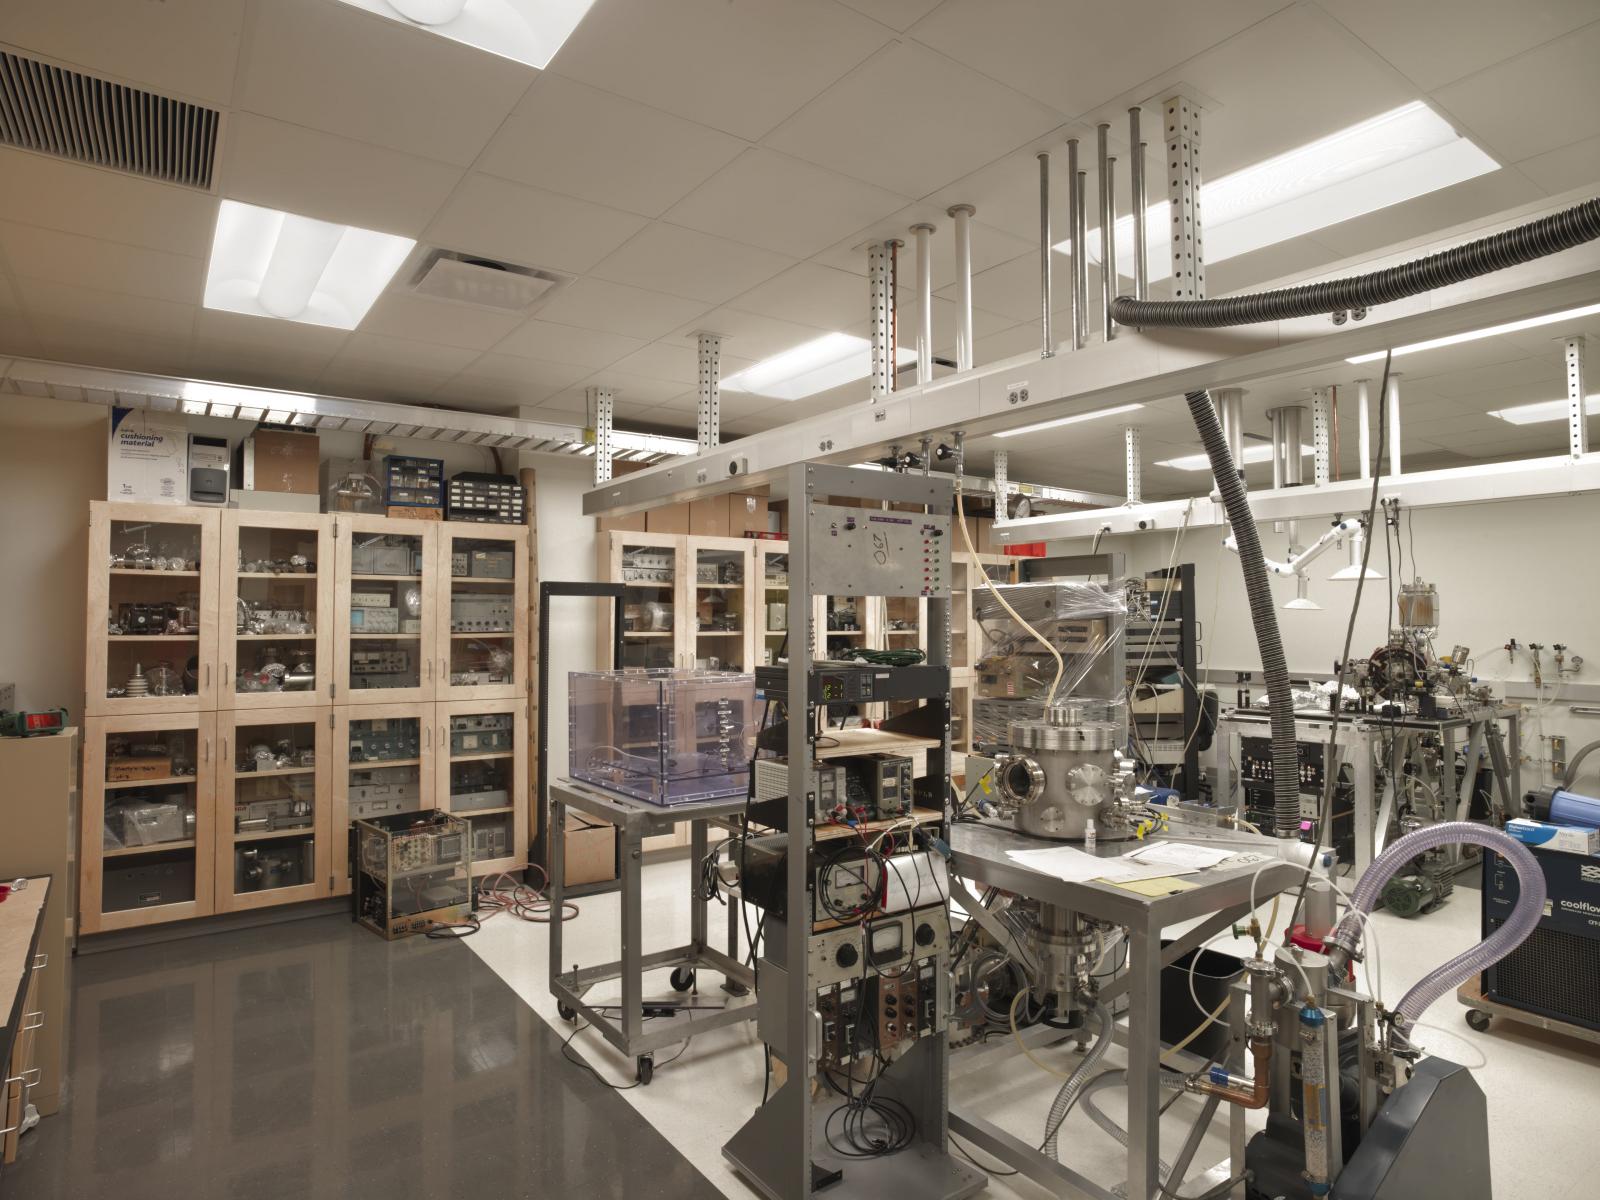 Lab interior with instruments on the table and in cabinets